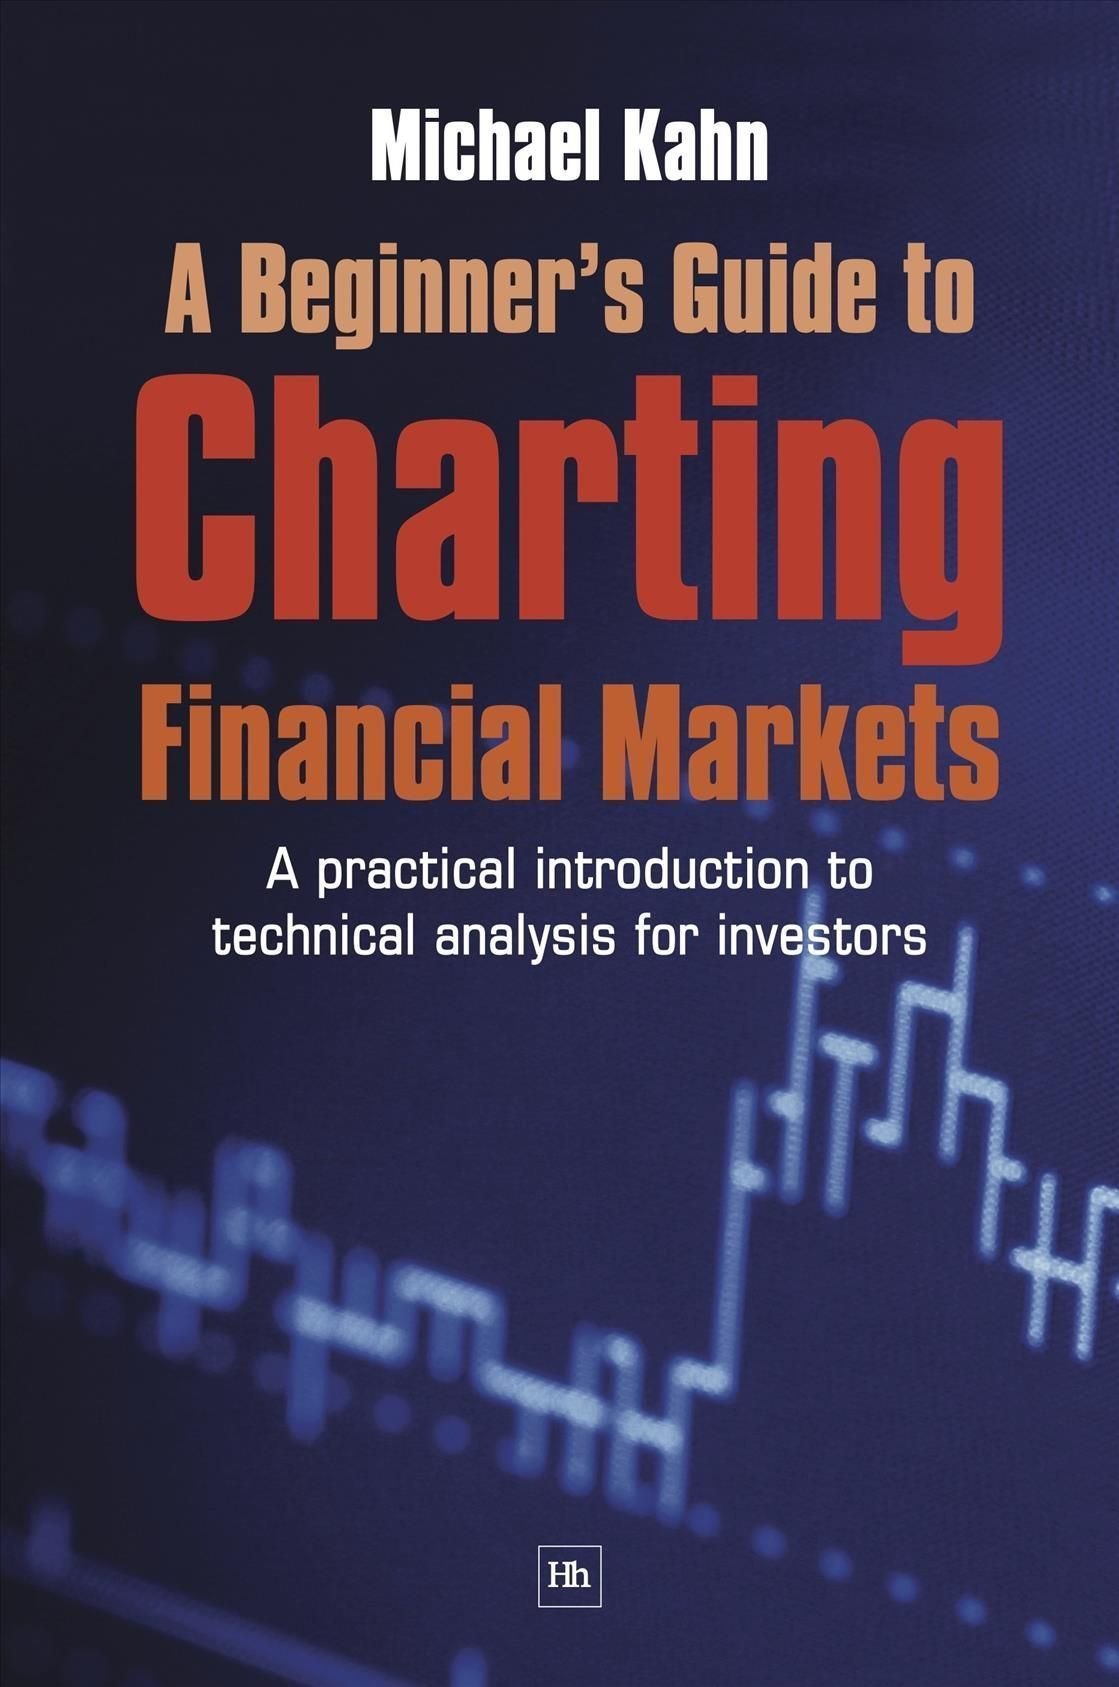 A Beginner's Guide to Charting Financial Markets